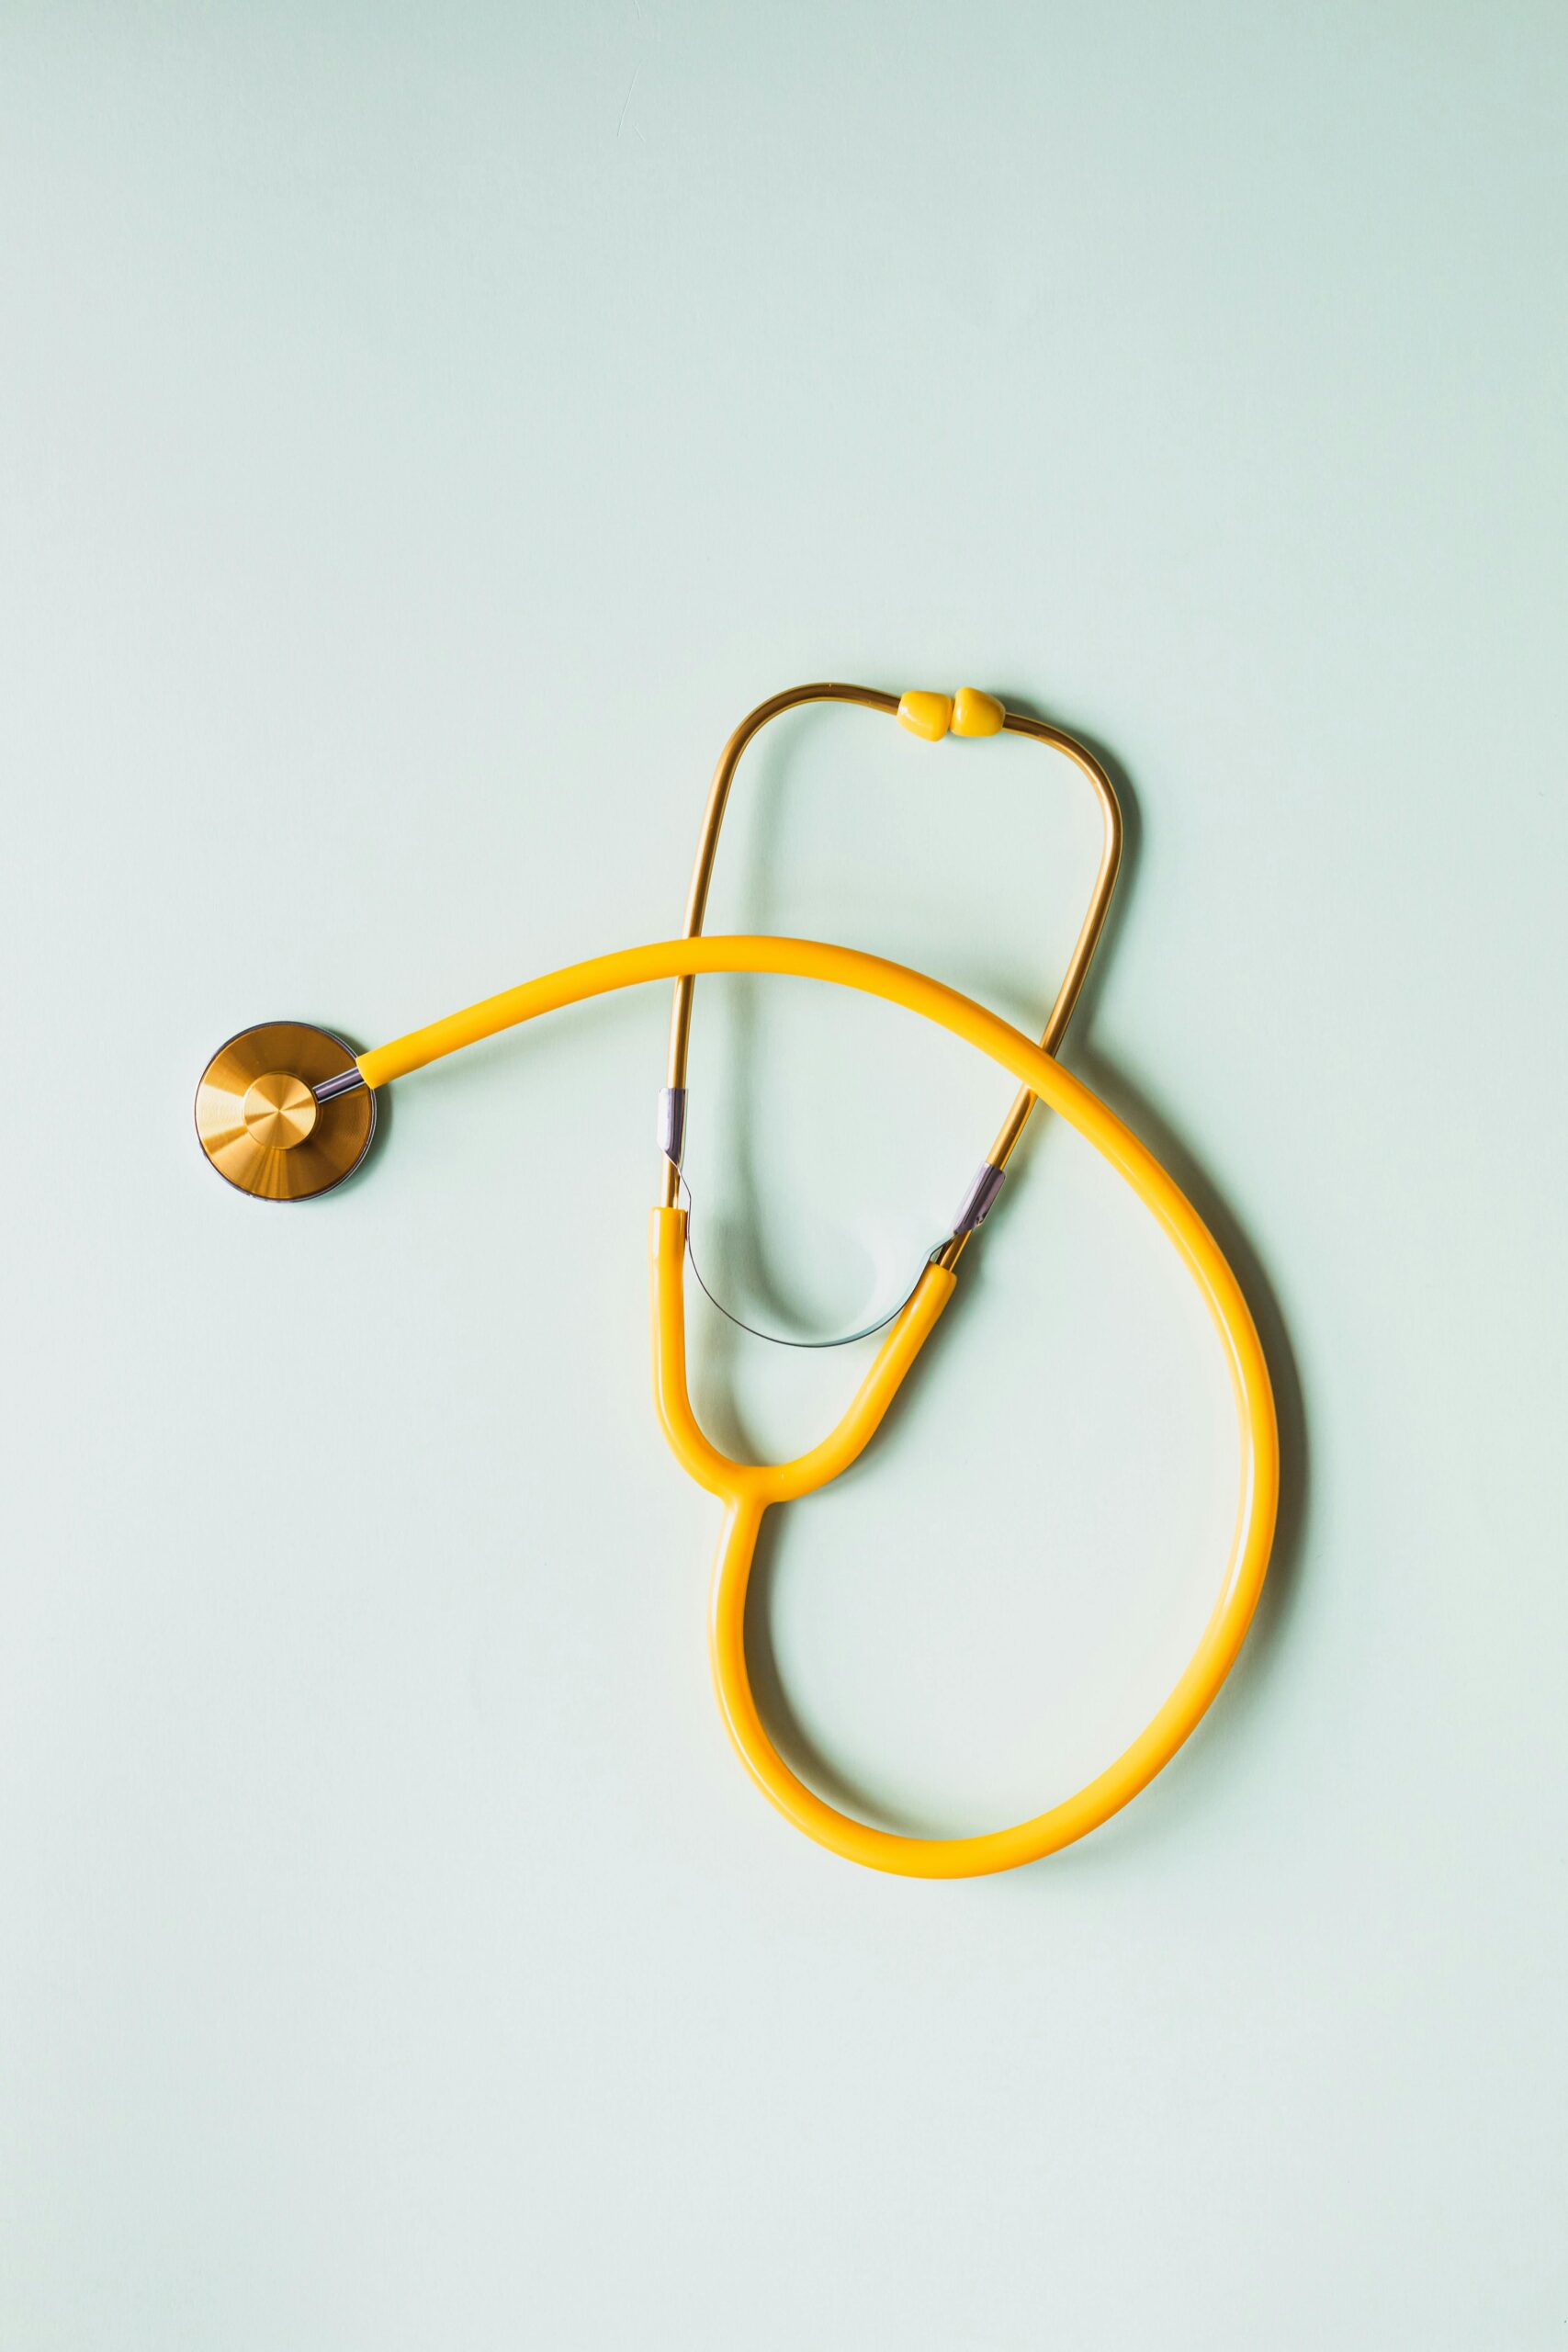 Picture of a stethoscope.